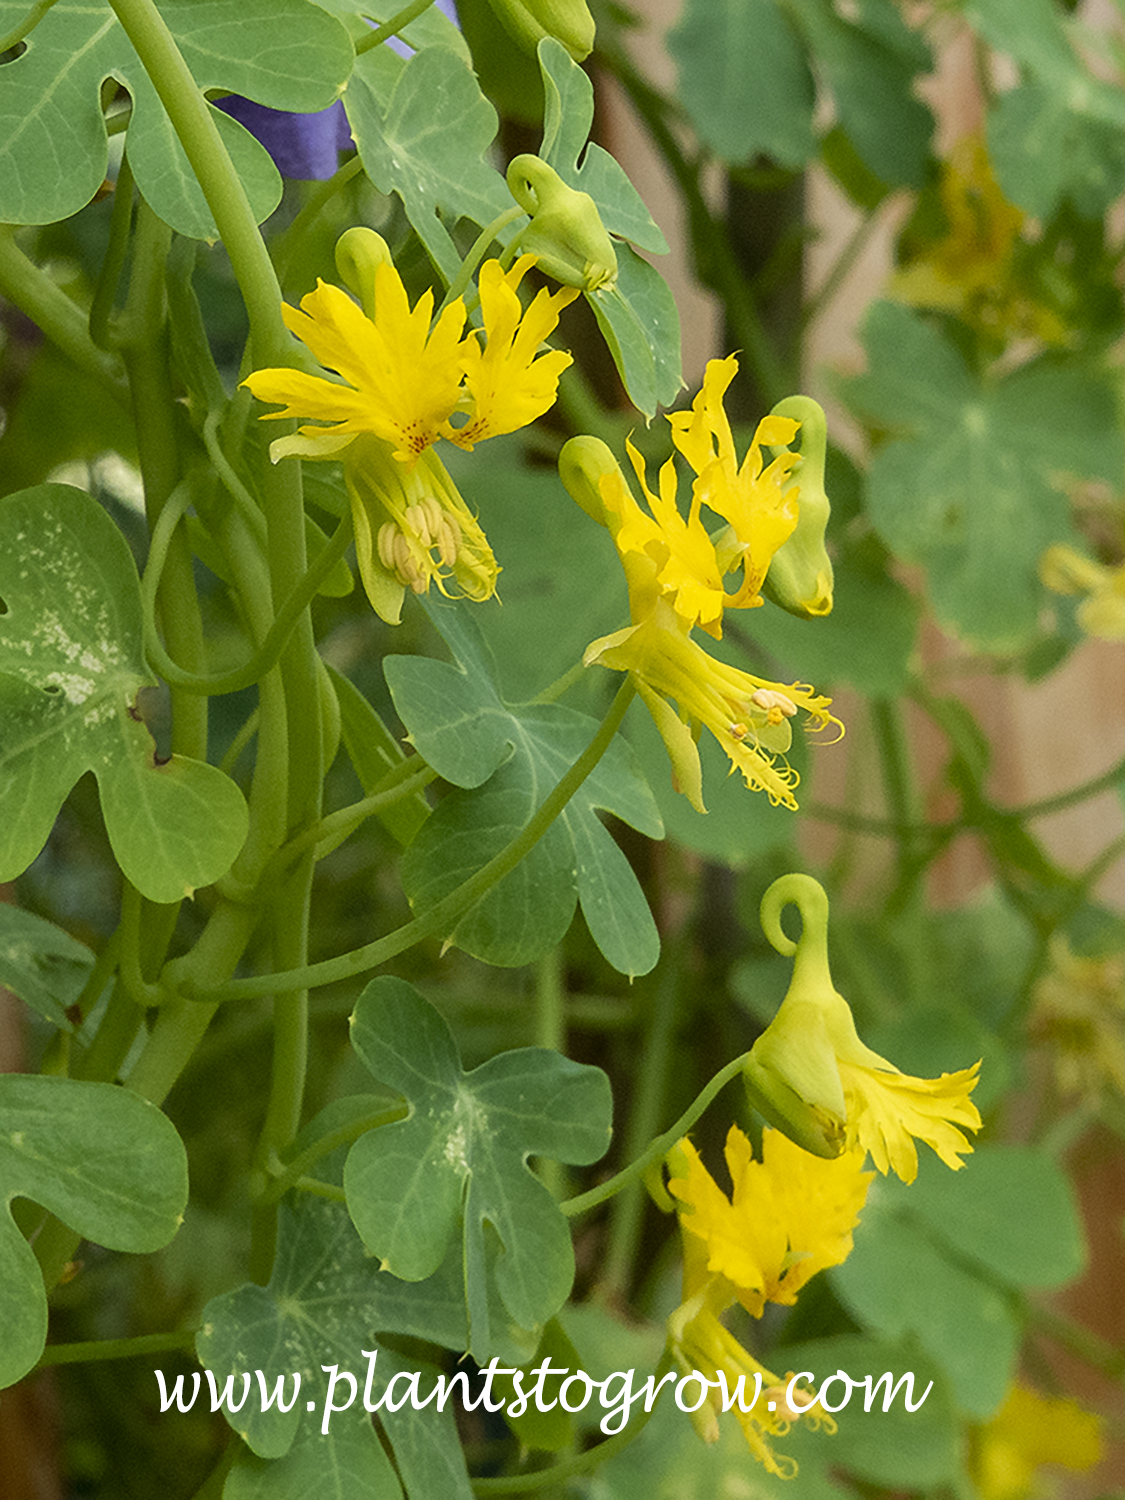 Canary Creeper (Tropaeolum peregrinum) 
Dig deep into your imagination to see this flower as a Canary.